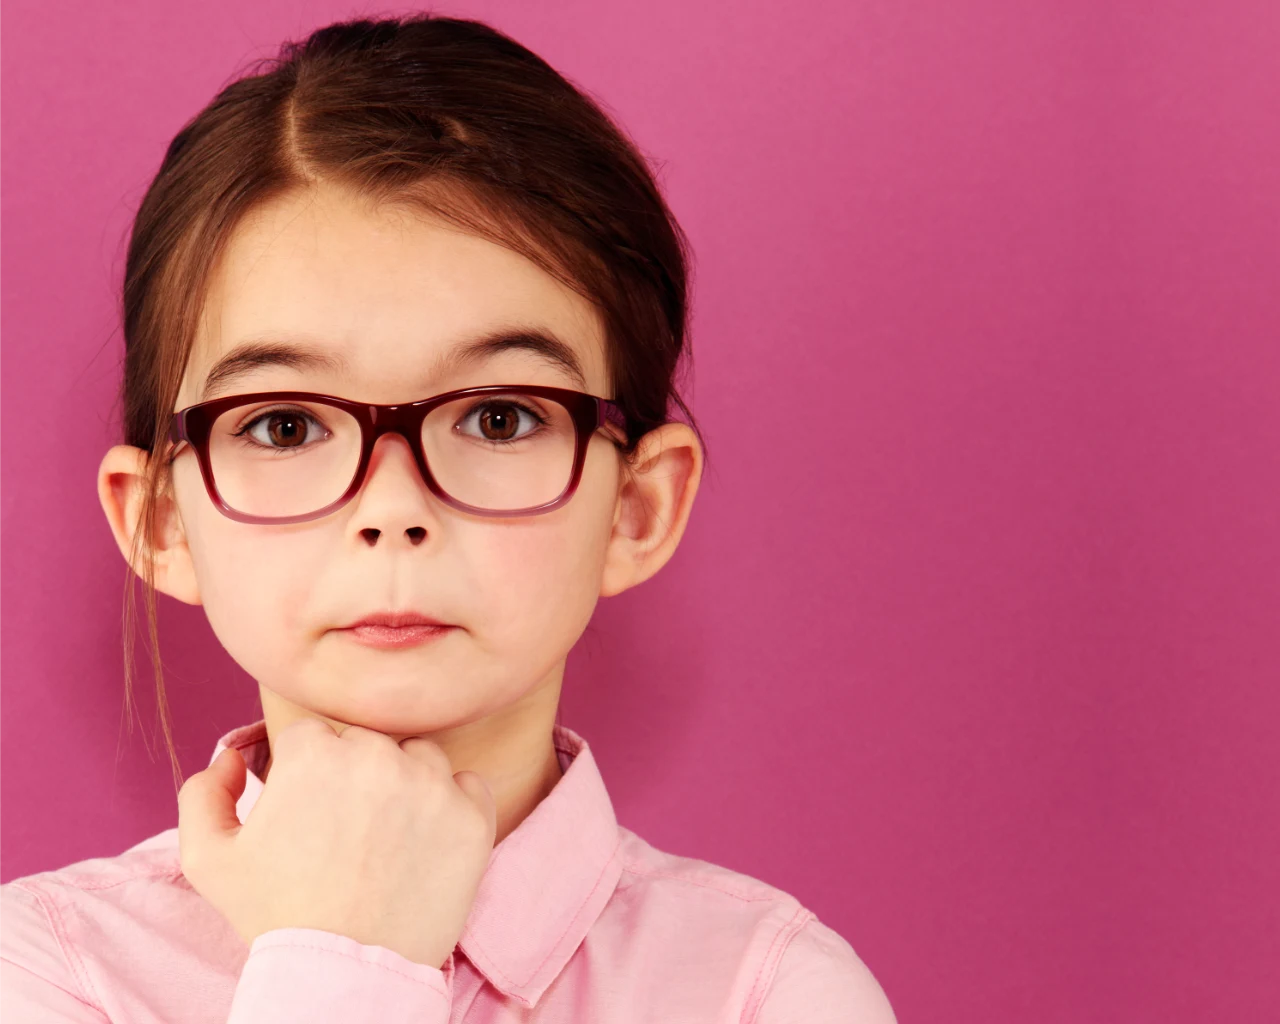 Young child wearing glasses and pink collar shirt with surprised look